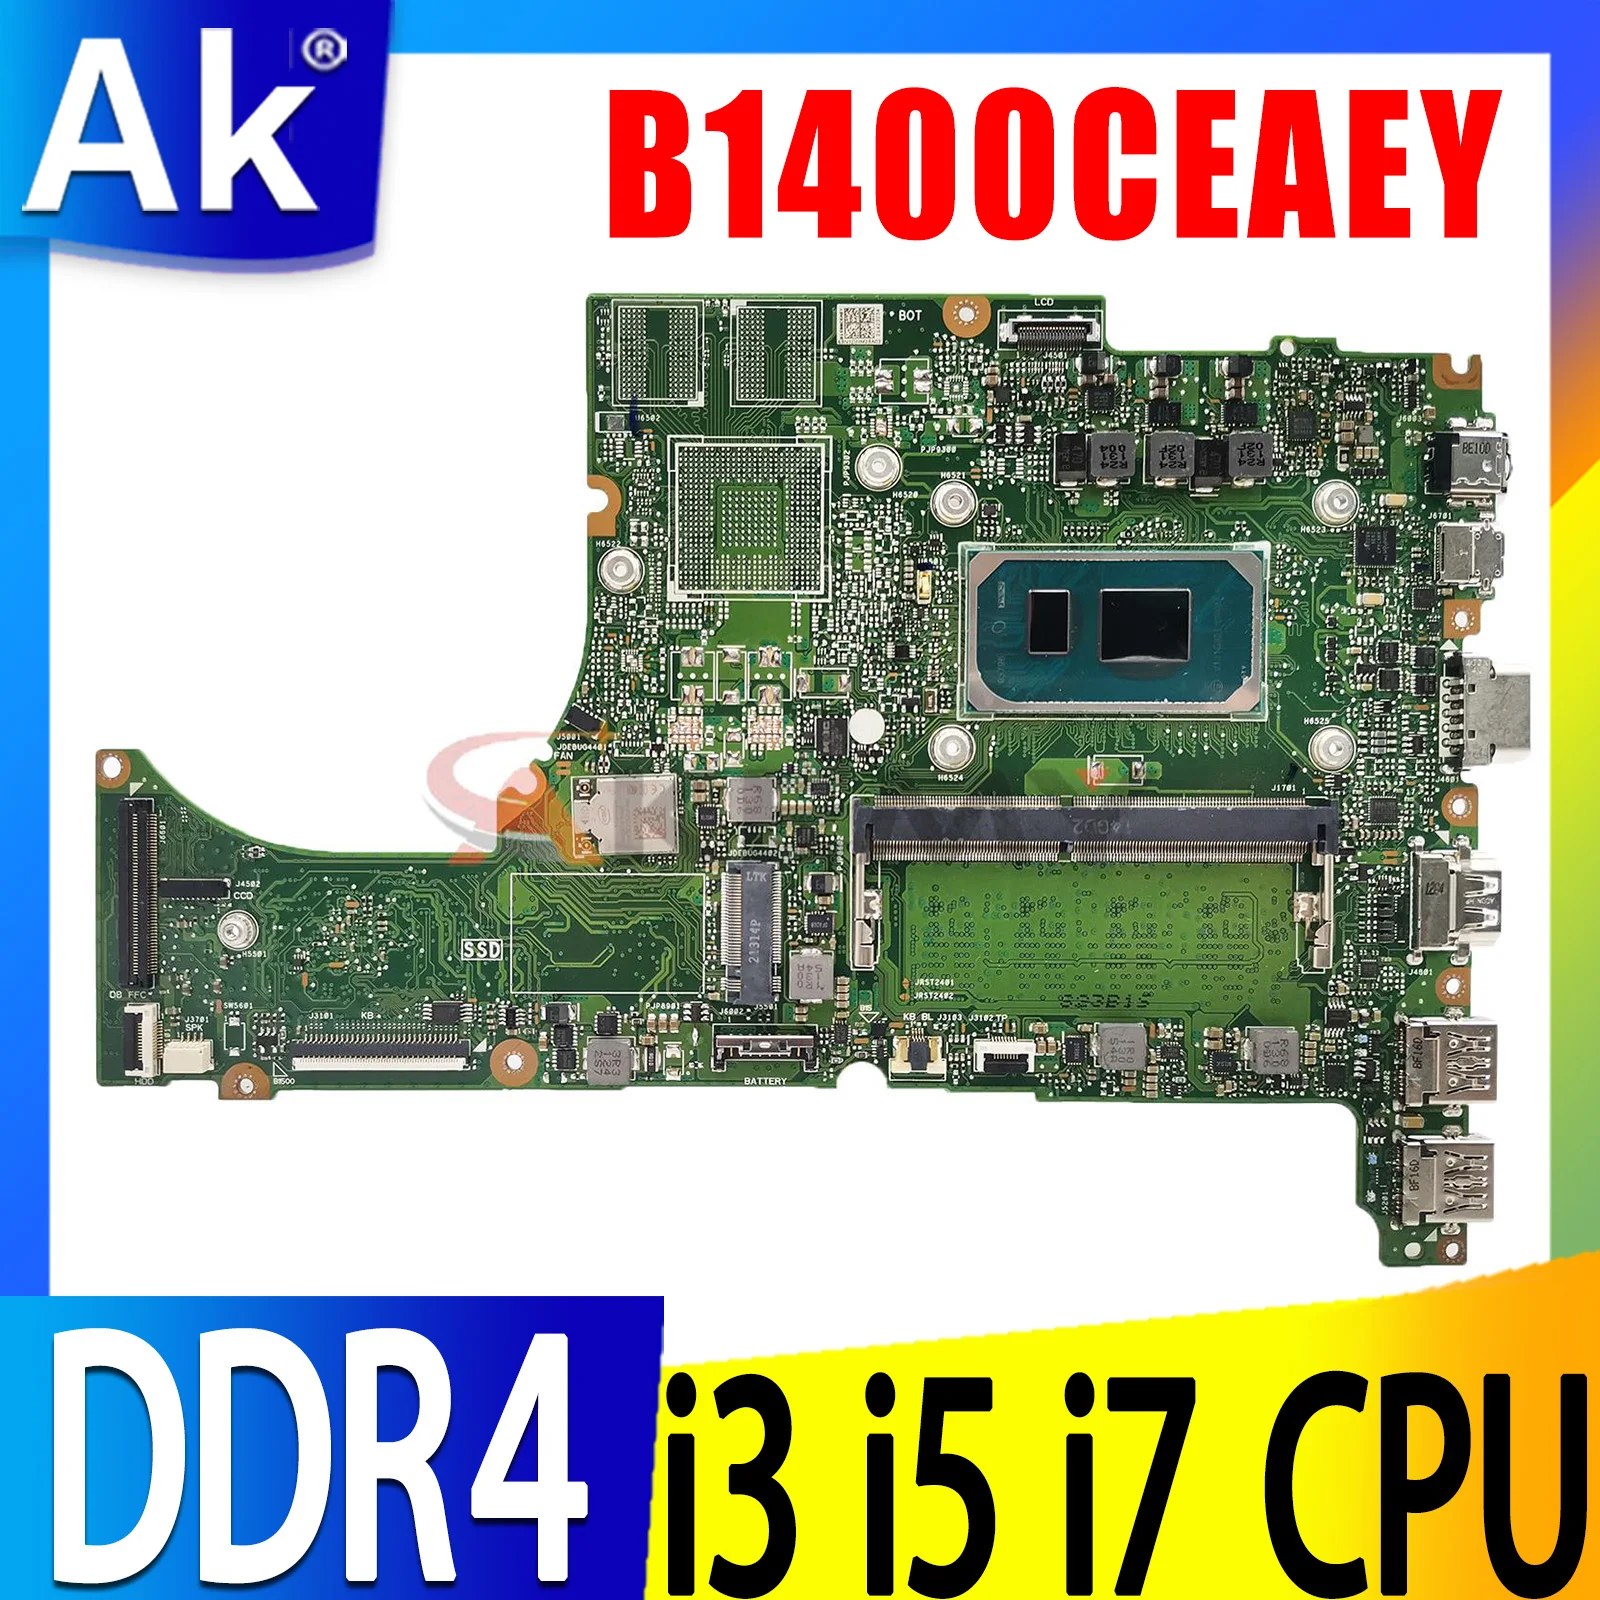 

B1400CEAEY Mainboard For Asus ExpertBook B1400CEAE-EB0116R Laptop Motherboard with i3 i5 i7 11th Gen CPU 4G 8G 16G RAM